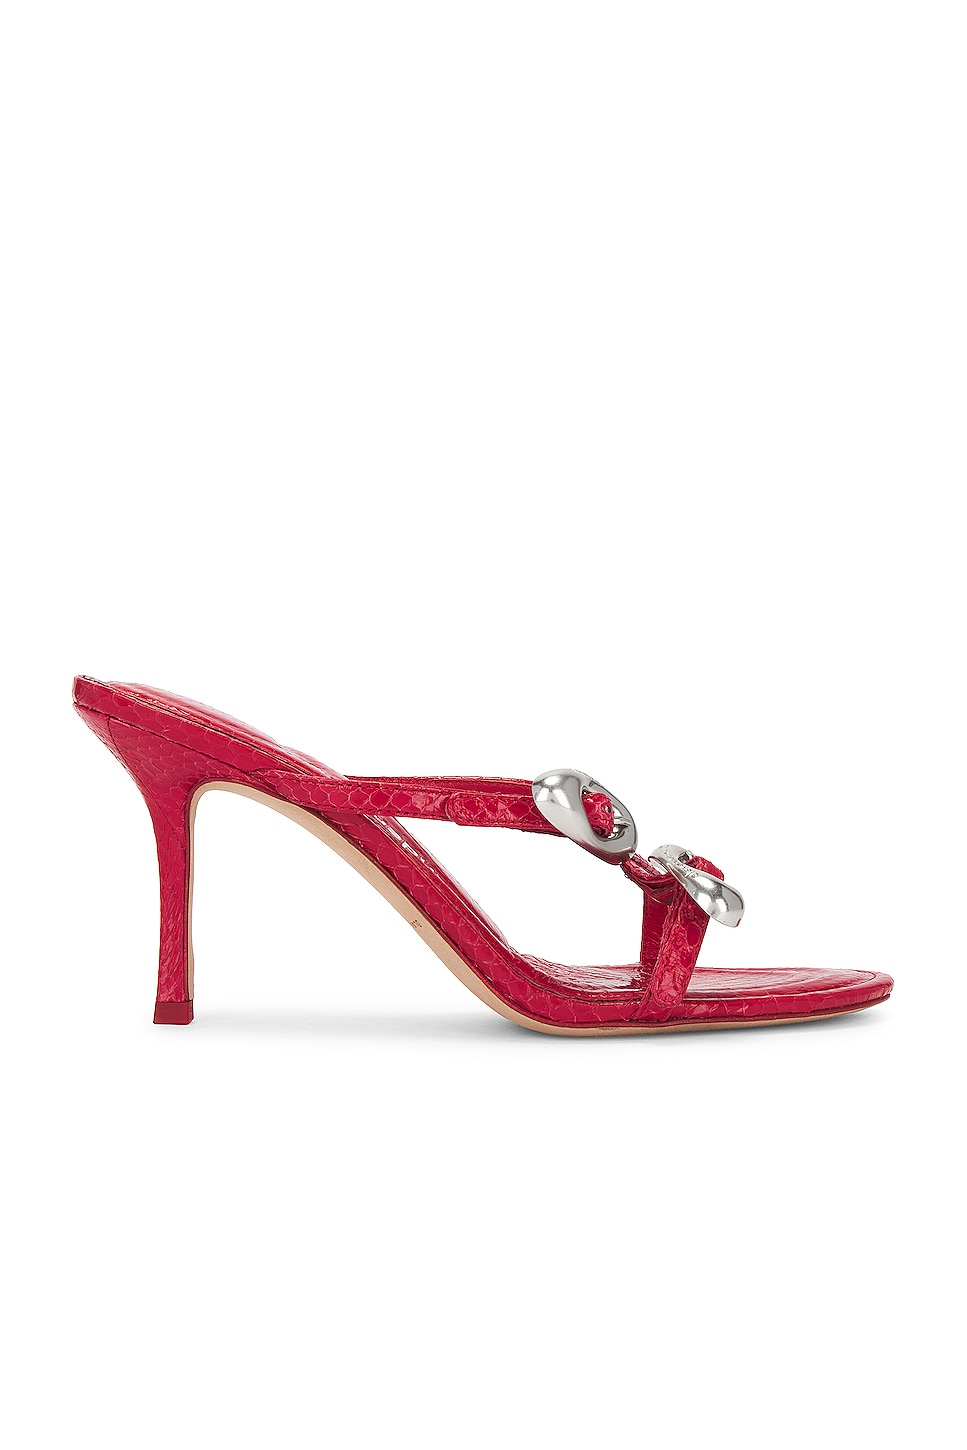 Image 1 of Alexander Wang Dome Strappy Slide Sandal in Bright Red